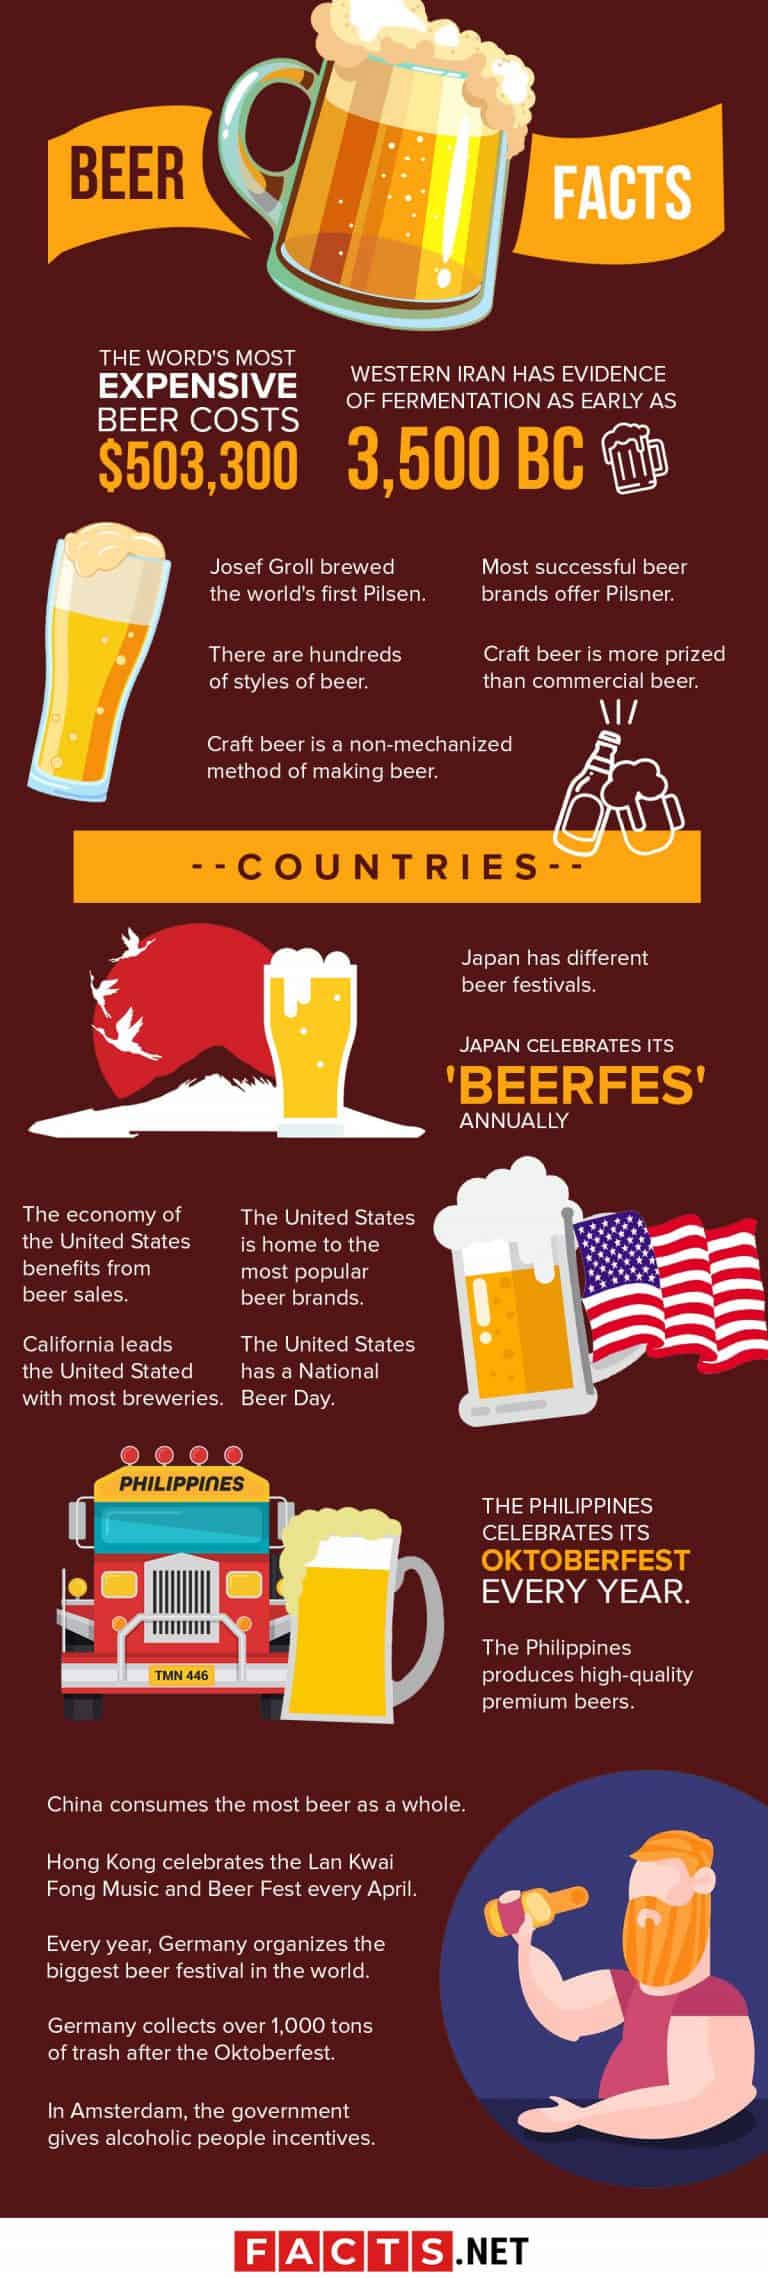 80 Beer Facts About One of the World's Most Famous Drink